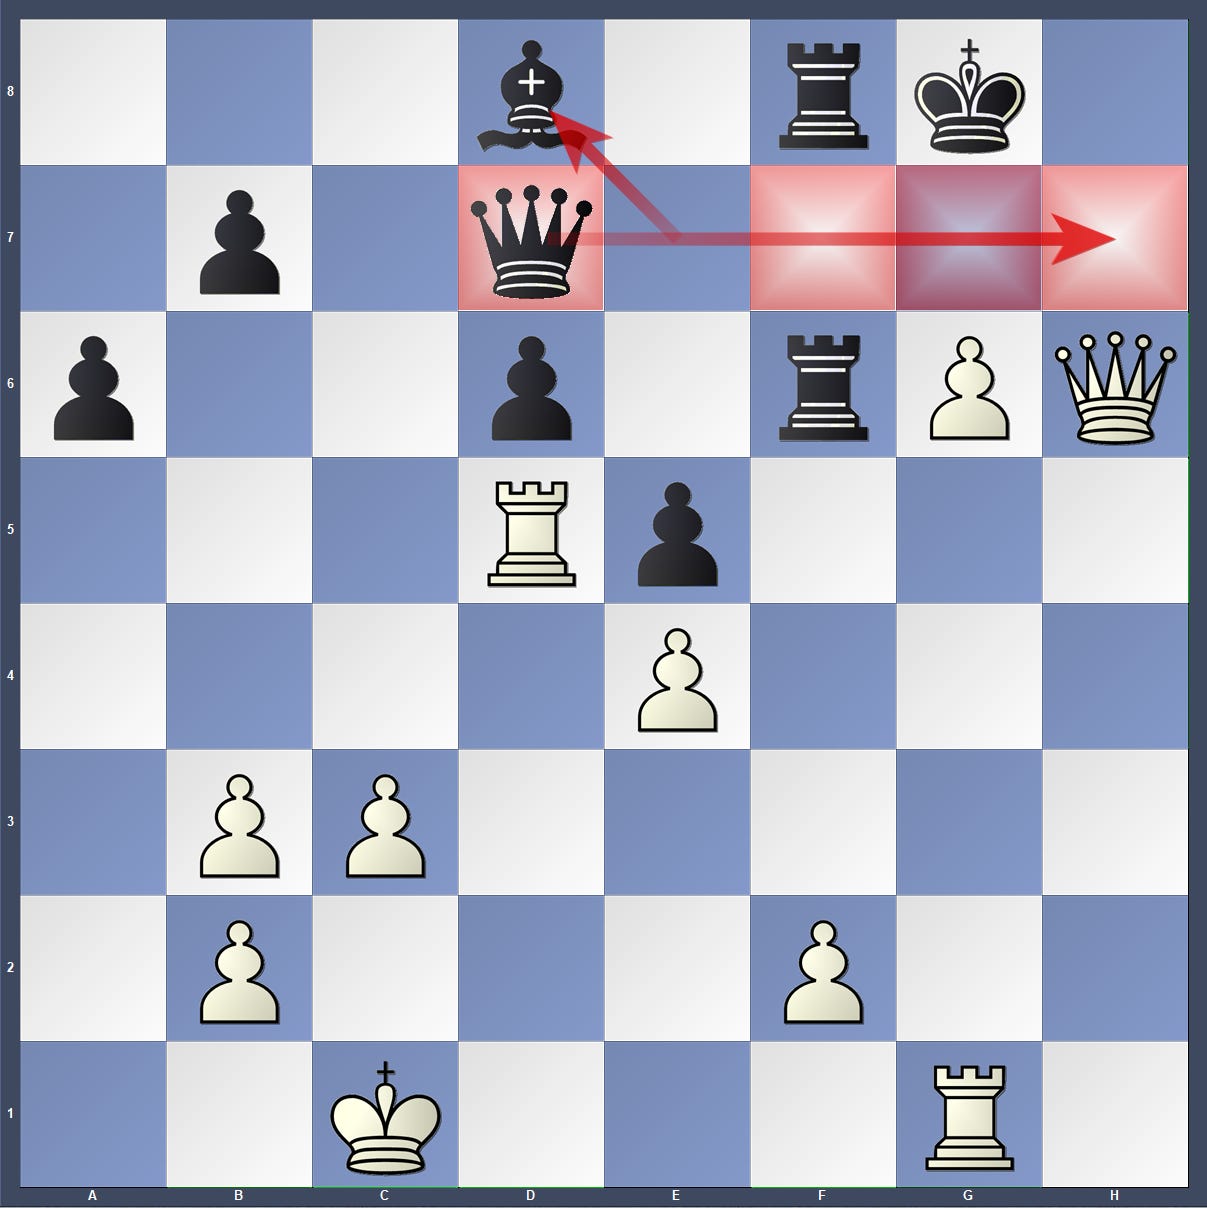 Nakamura defeats So in the Semifinal of the Chess.com Speed Chess  Championship (SCC) 2020